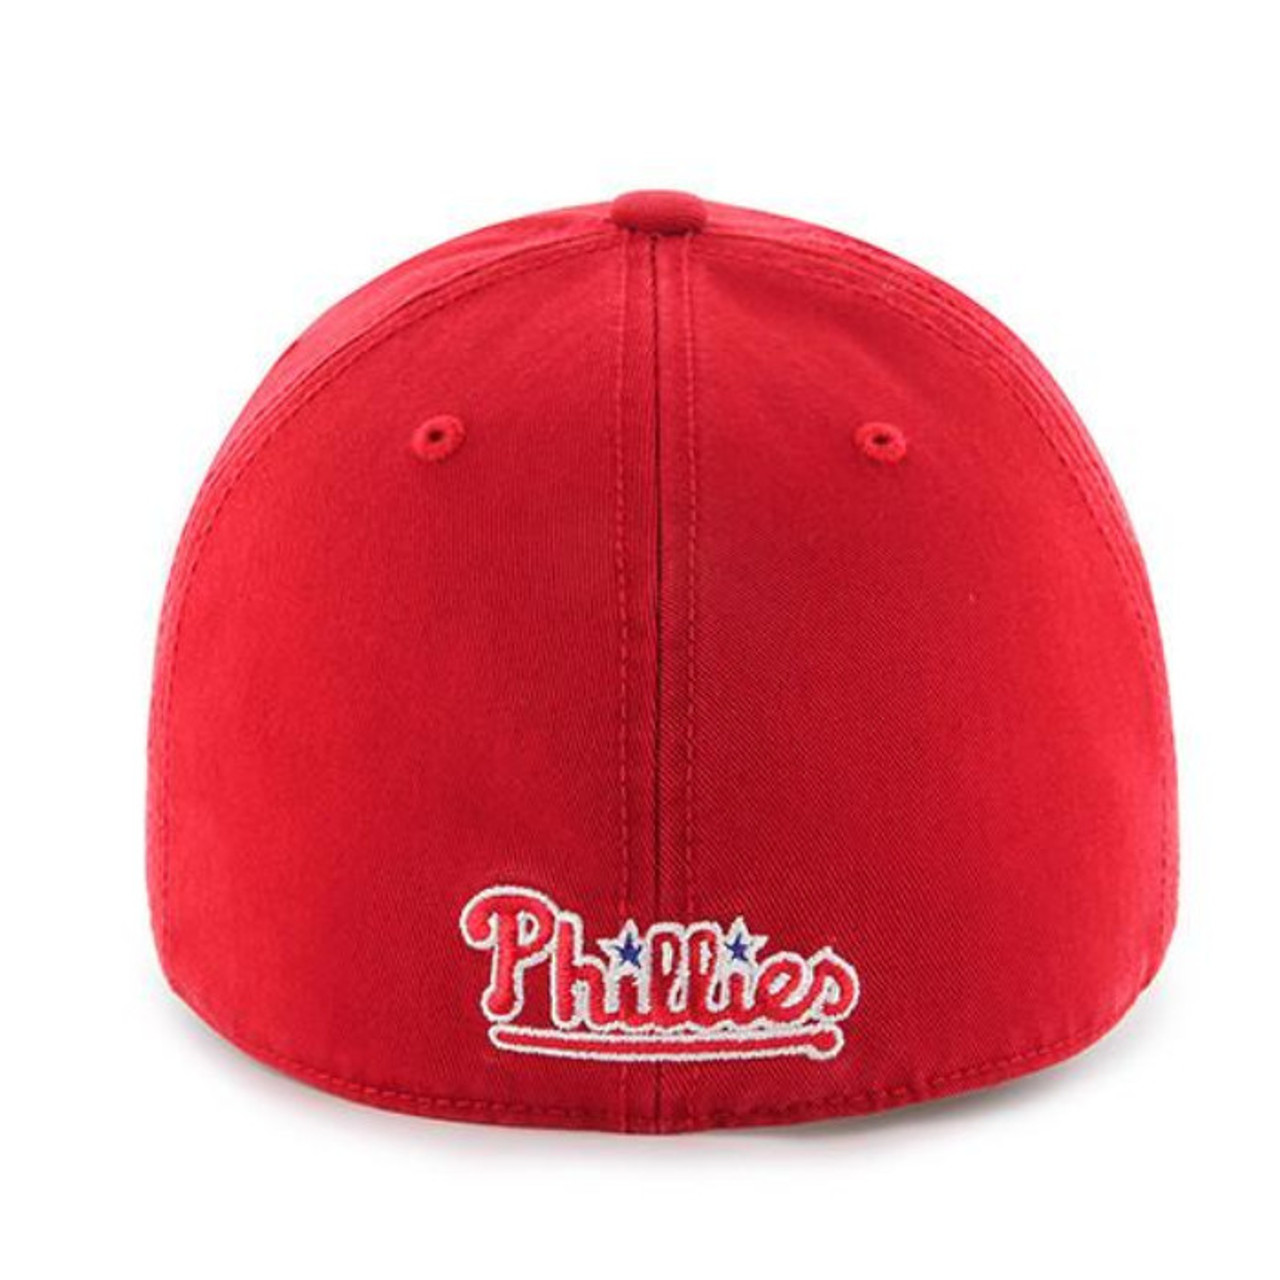  '47 Brand Relaxed Fit Cap - MVP Philadelphia Phillies red :  Sports & Outdoors